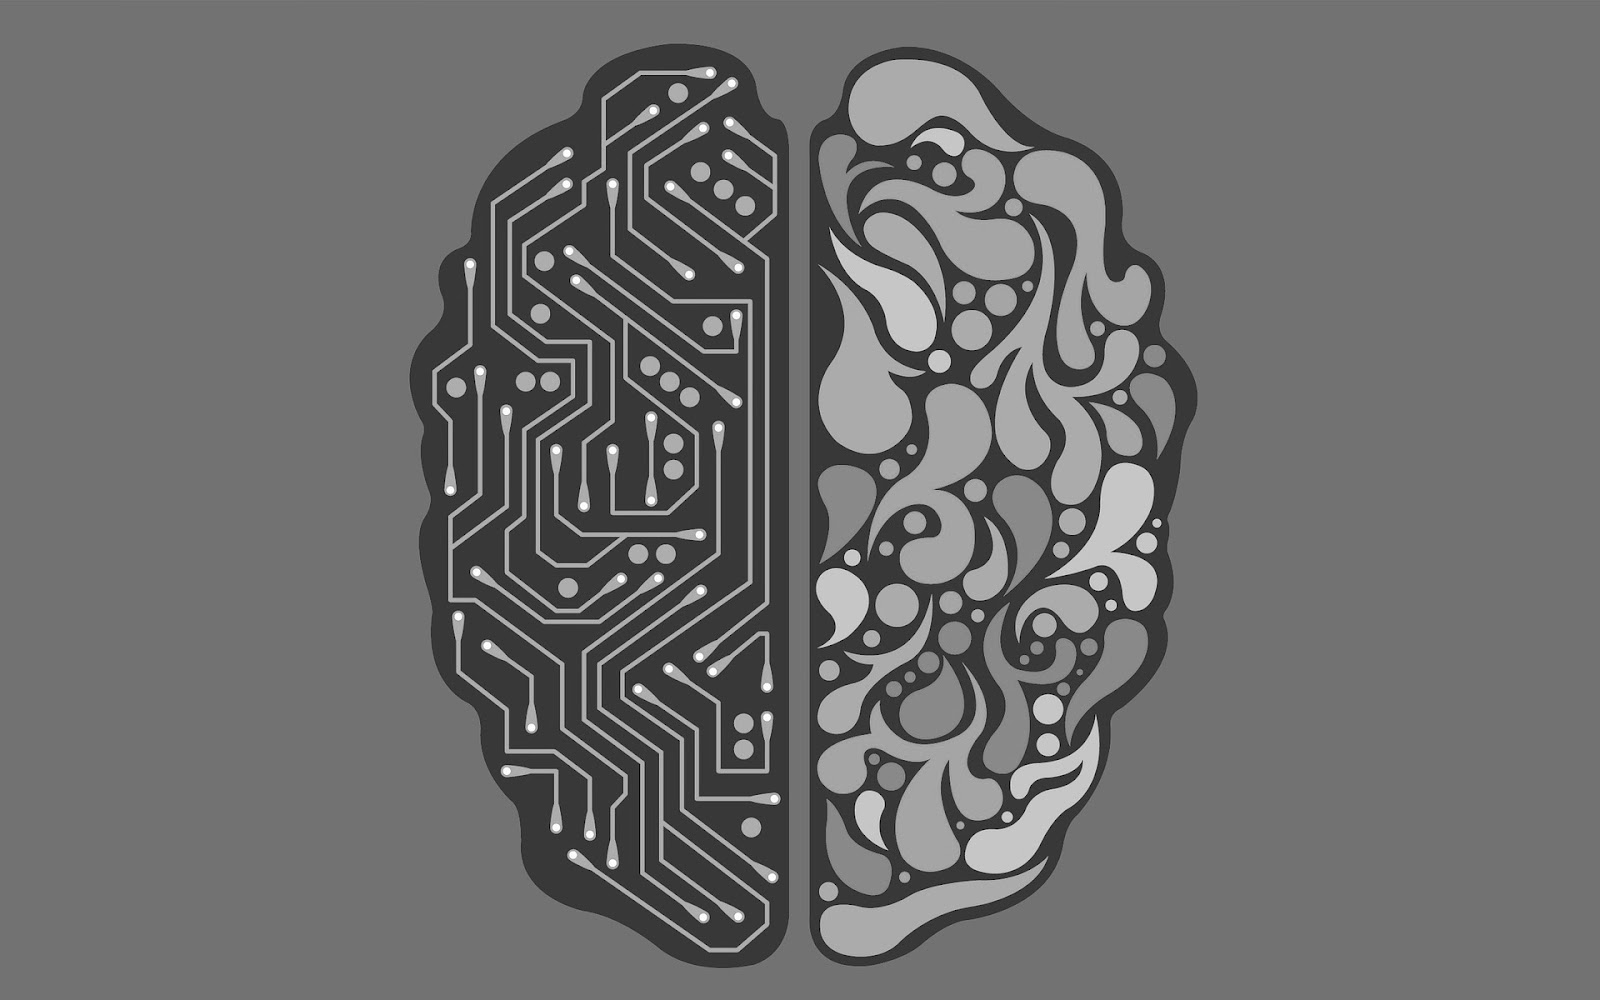 Test Automation With AI